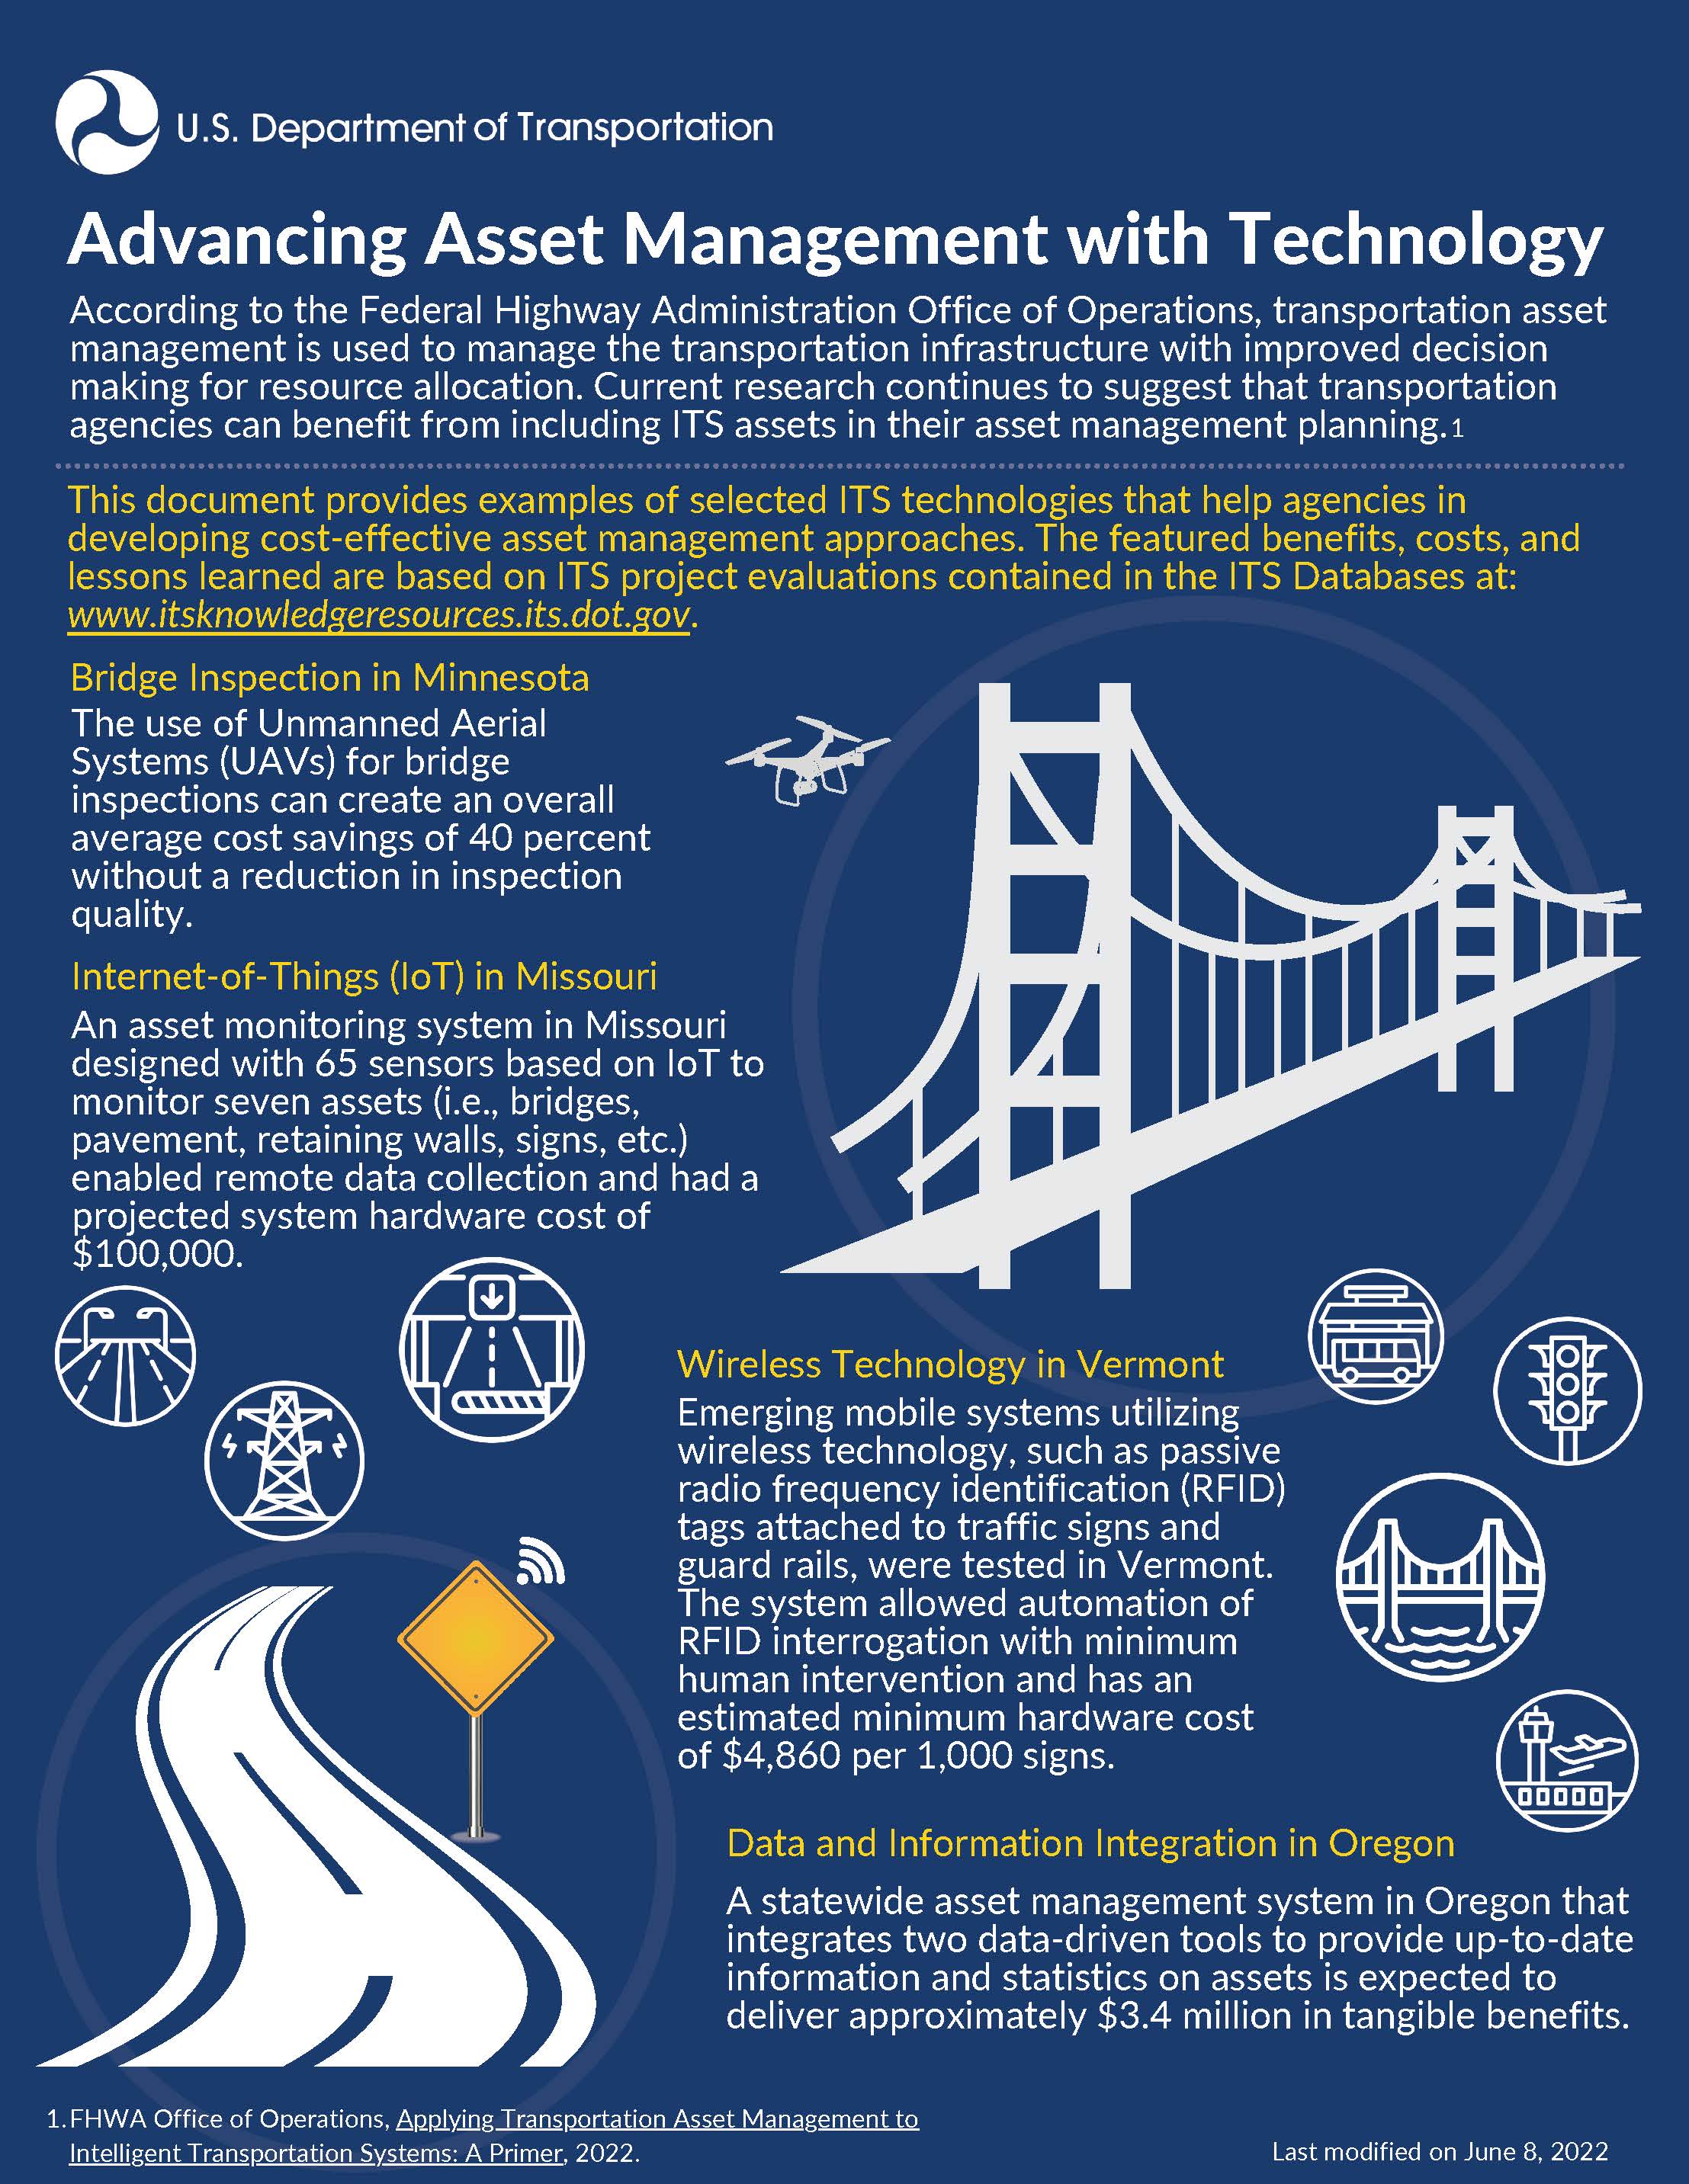 This infographic provides examples of selected ITS technologies that help agencies in developing cost-effective asset management approaches, including bridge inspections in Minnesota, Internet of Things (IoT) in Missouri, and Wireless Technology in Vermont.